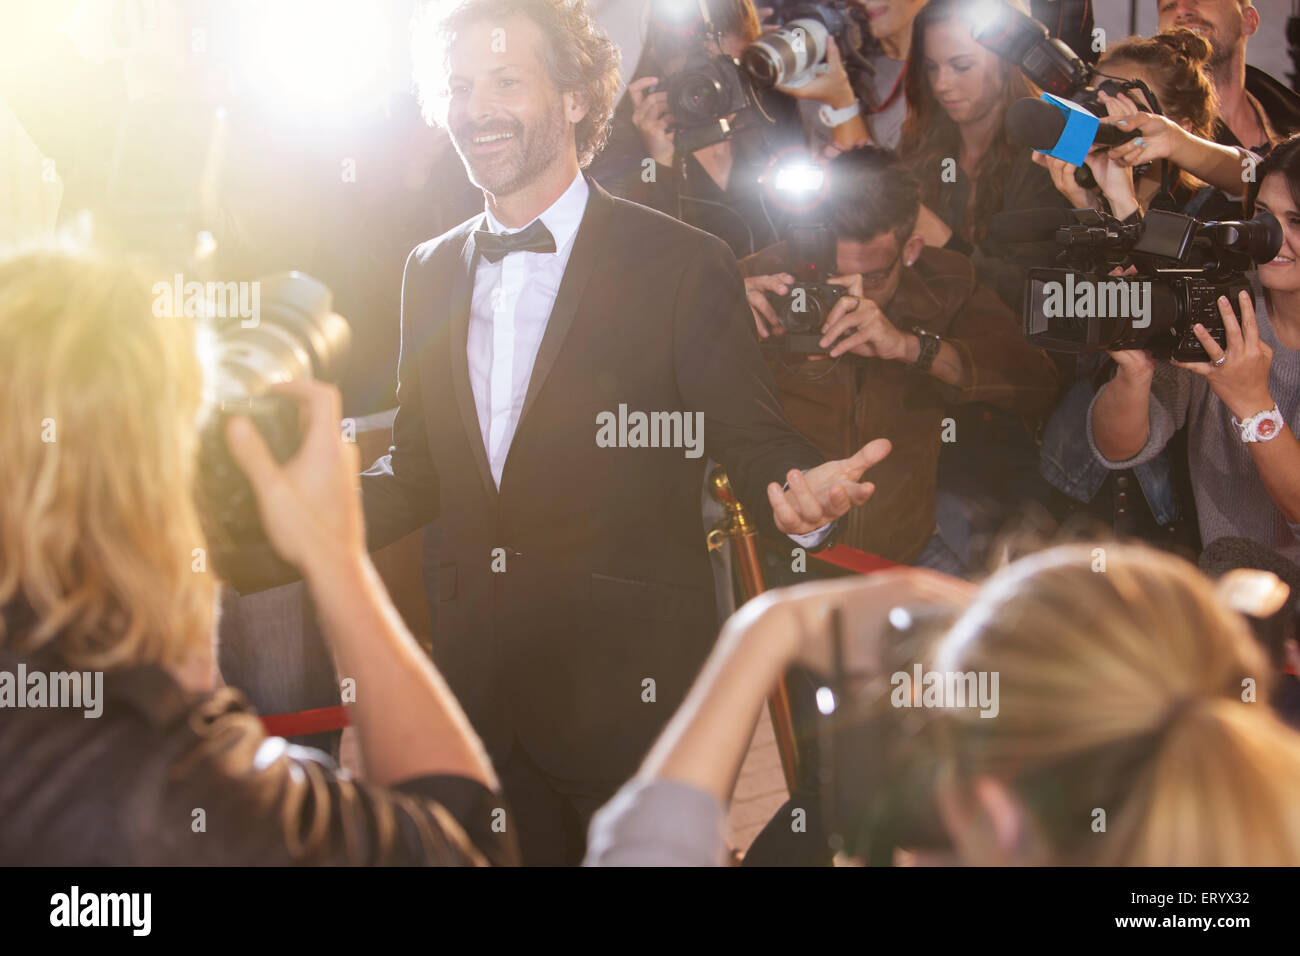 Smiling celebrity posing for paparazzi photographers at event Stock Photo